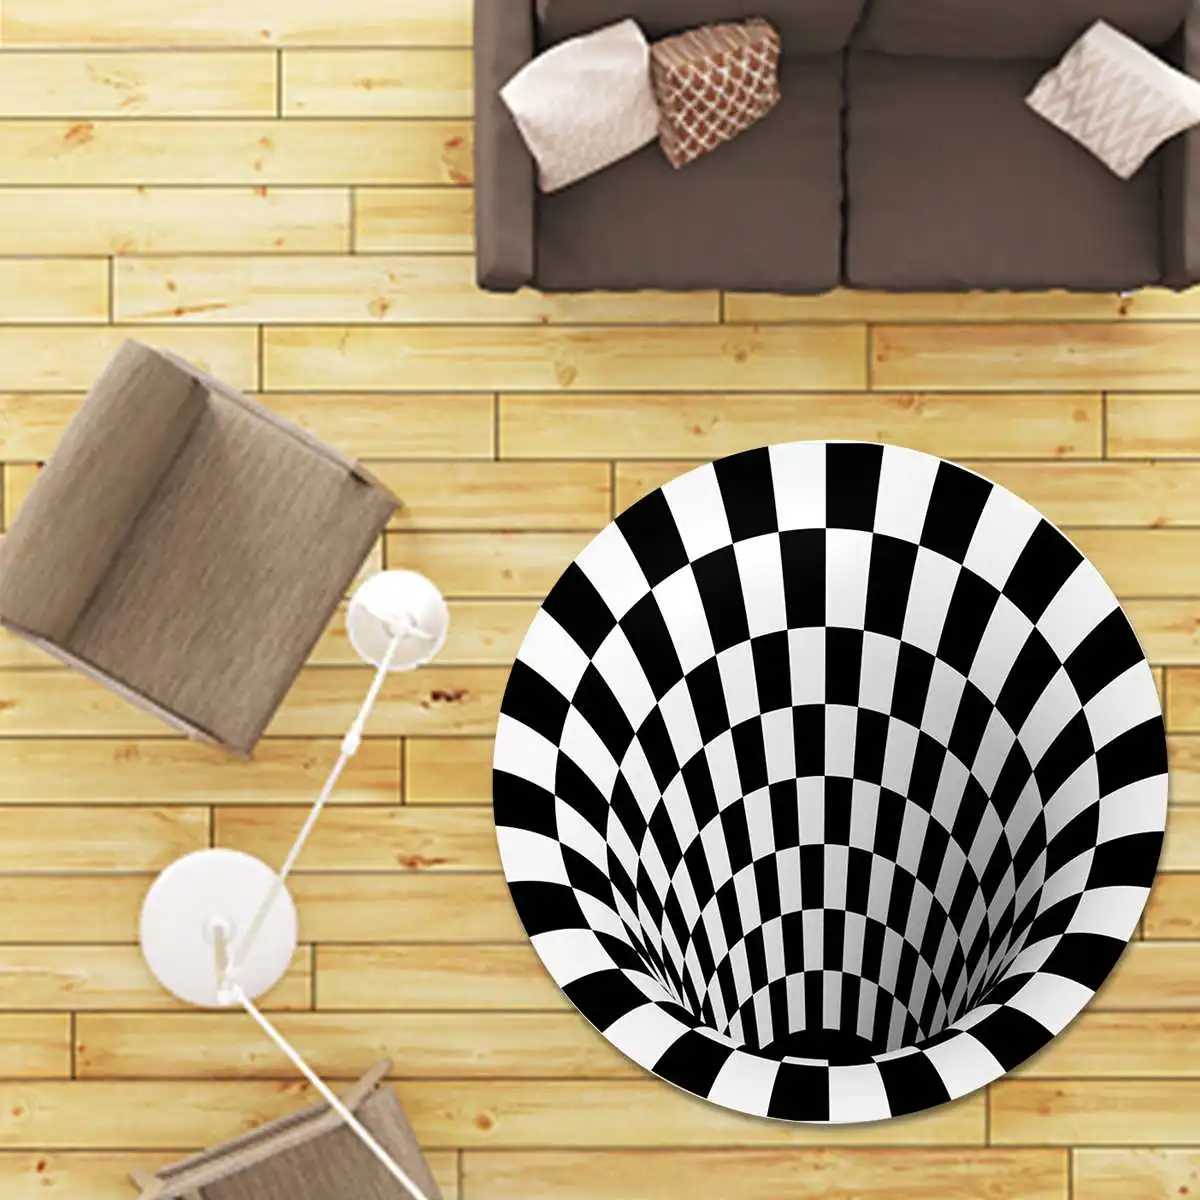 Size : 50cm YUNSHAO Rug Pads Area Rugs 3D Home Carpet Black White Stereo Vision Mat Living Room Doormat Tea Table Three-Dimensional Sofa Illusion Mat Zebra Pattern Floor Mat Home Decoration